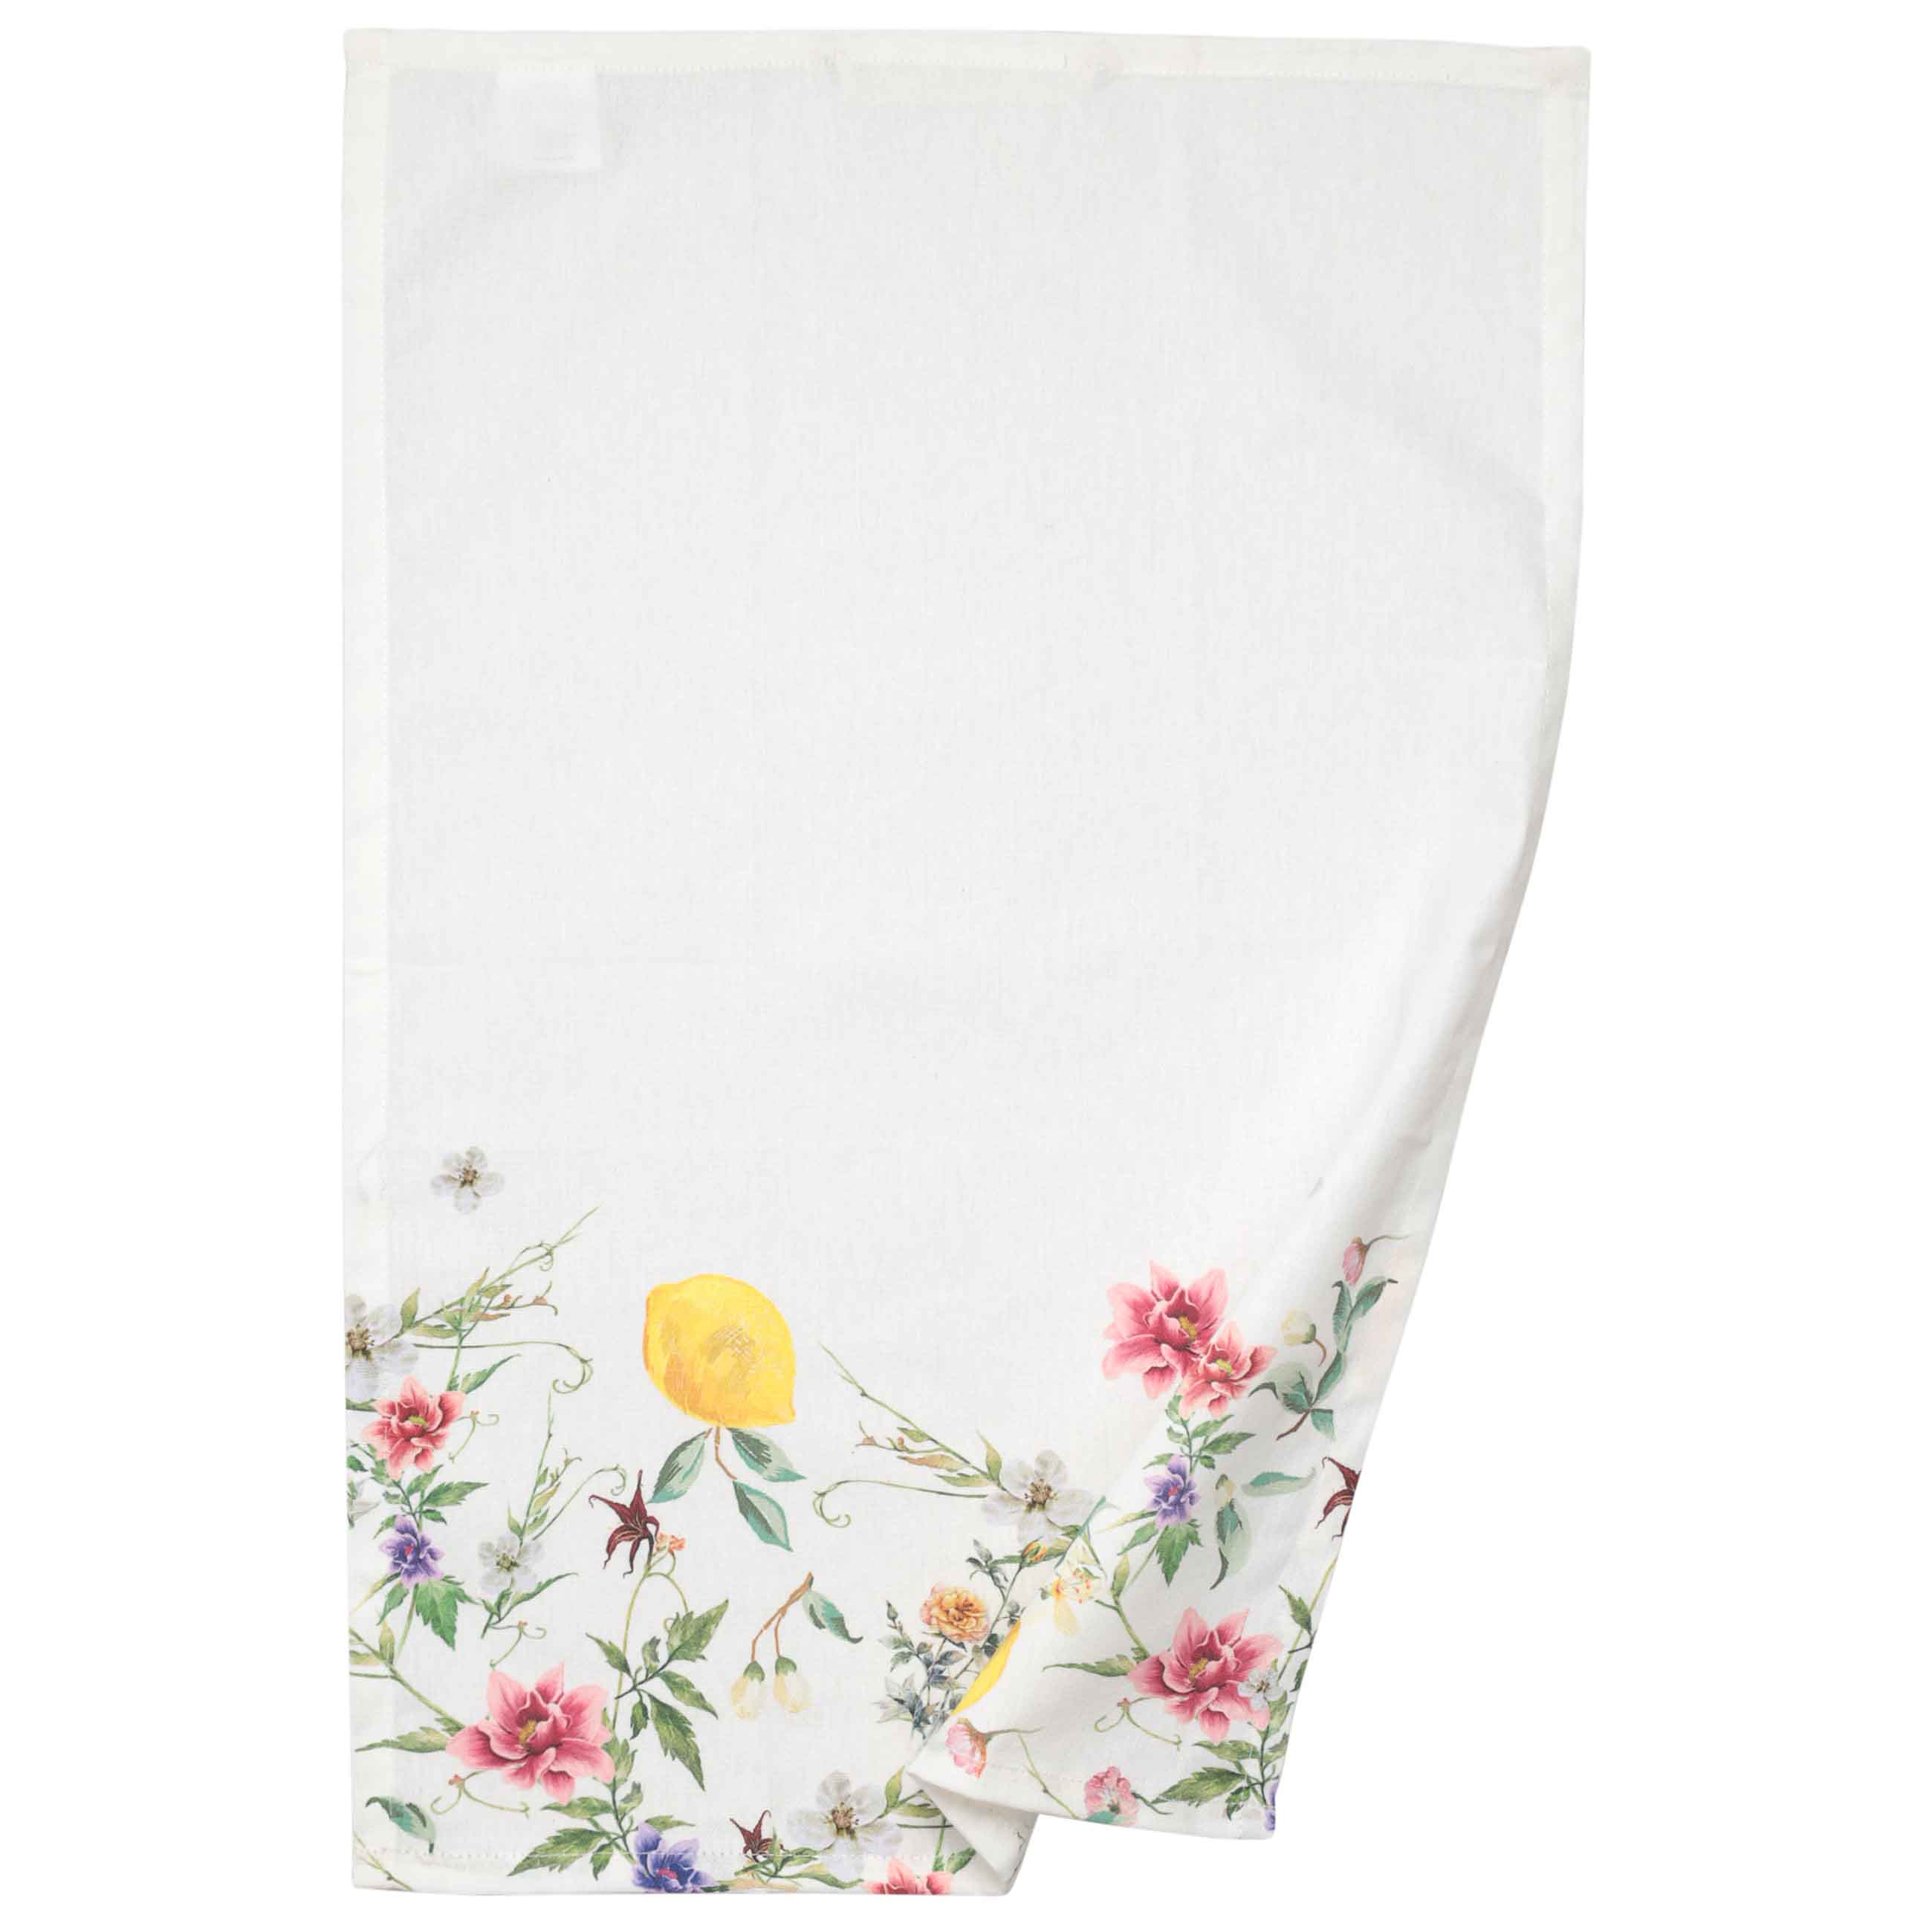 Kitchen towel, 40x60 cm, cotton, white, Flowers and lemons, Sicily in bloom изображение № 2